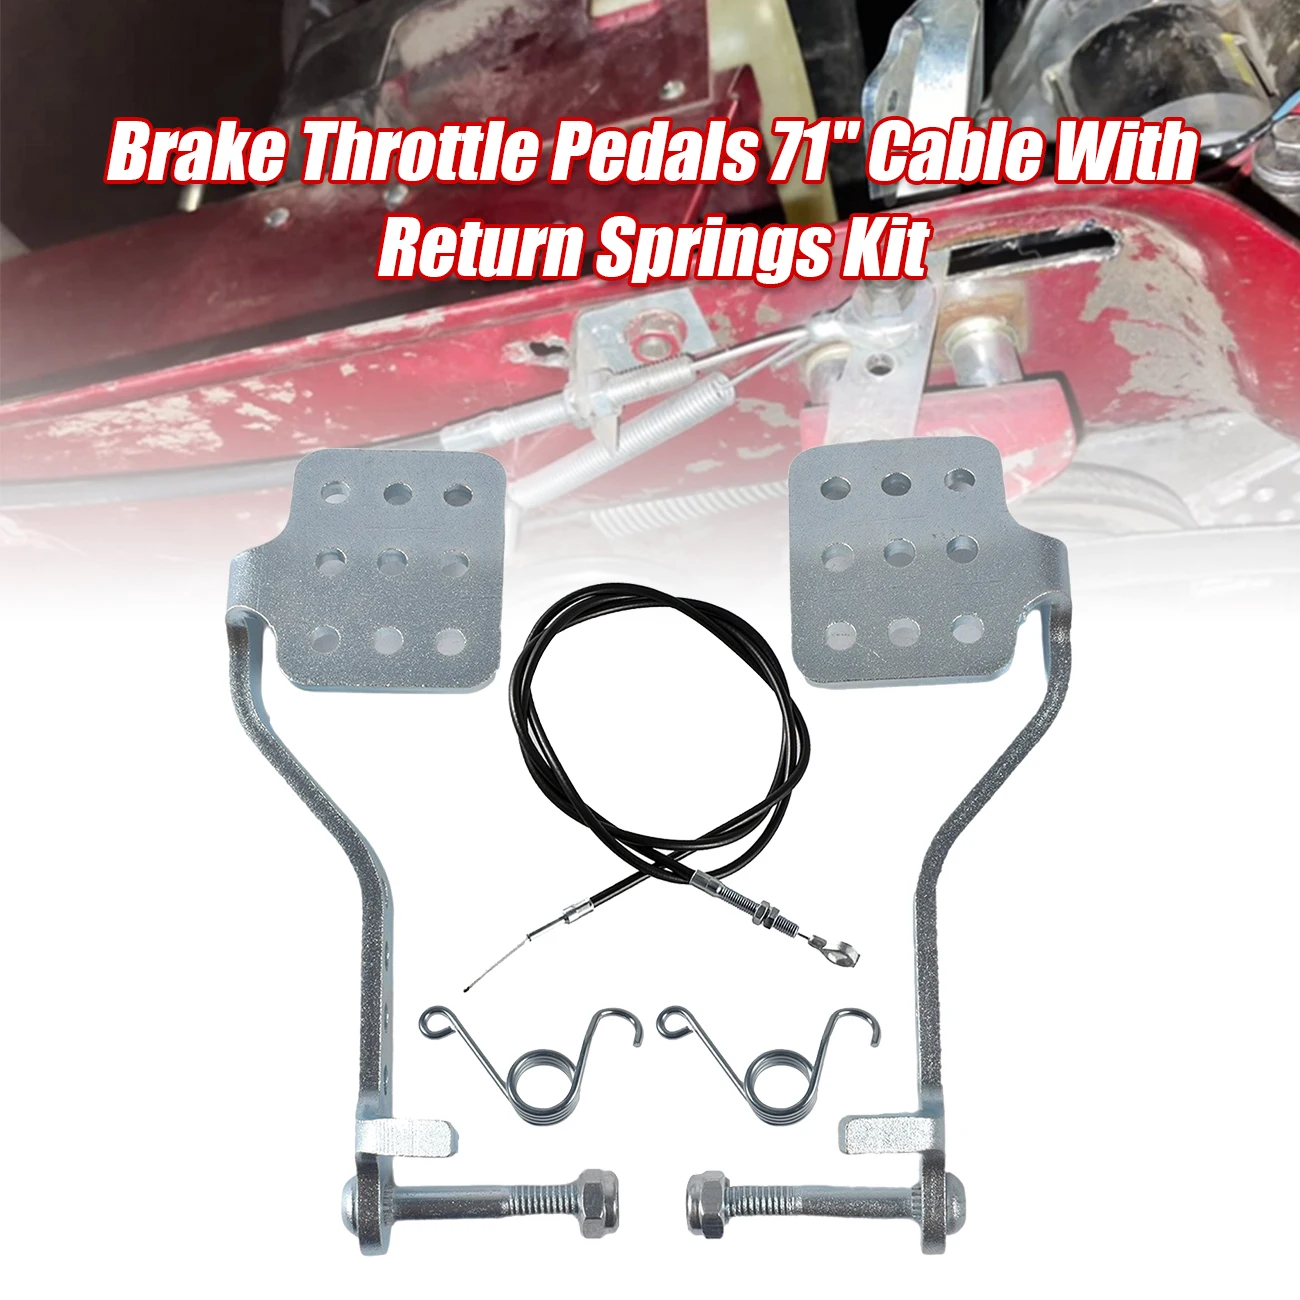 

Brake Throttle Pedals 71" Cable with Return Springs Kit For 196cc 6.5hp Road Rocket Azusa Fun Kart Radio Flyer Carter Go Kart